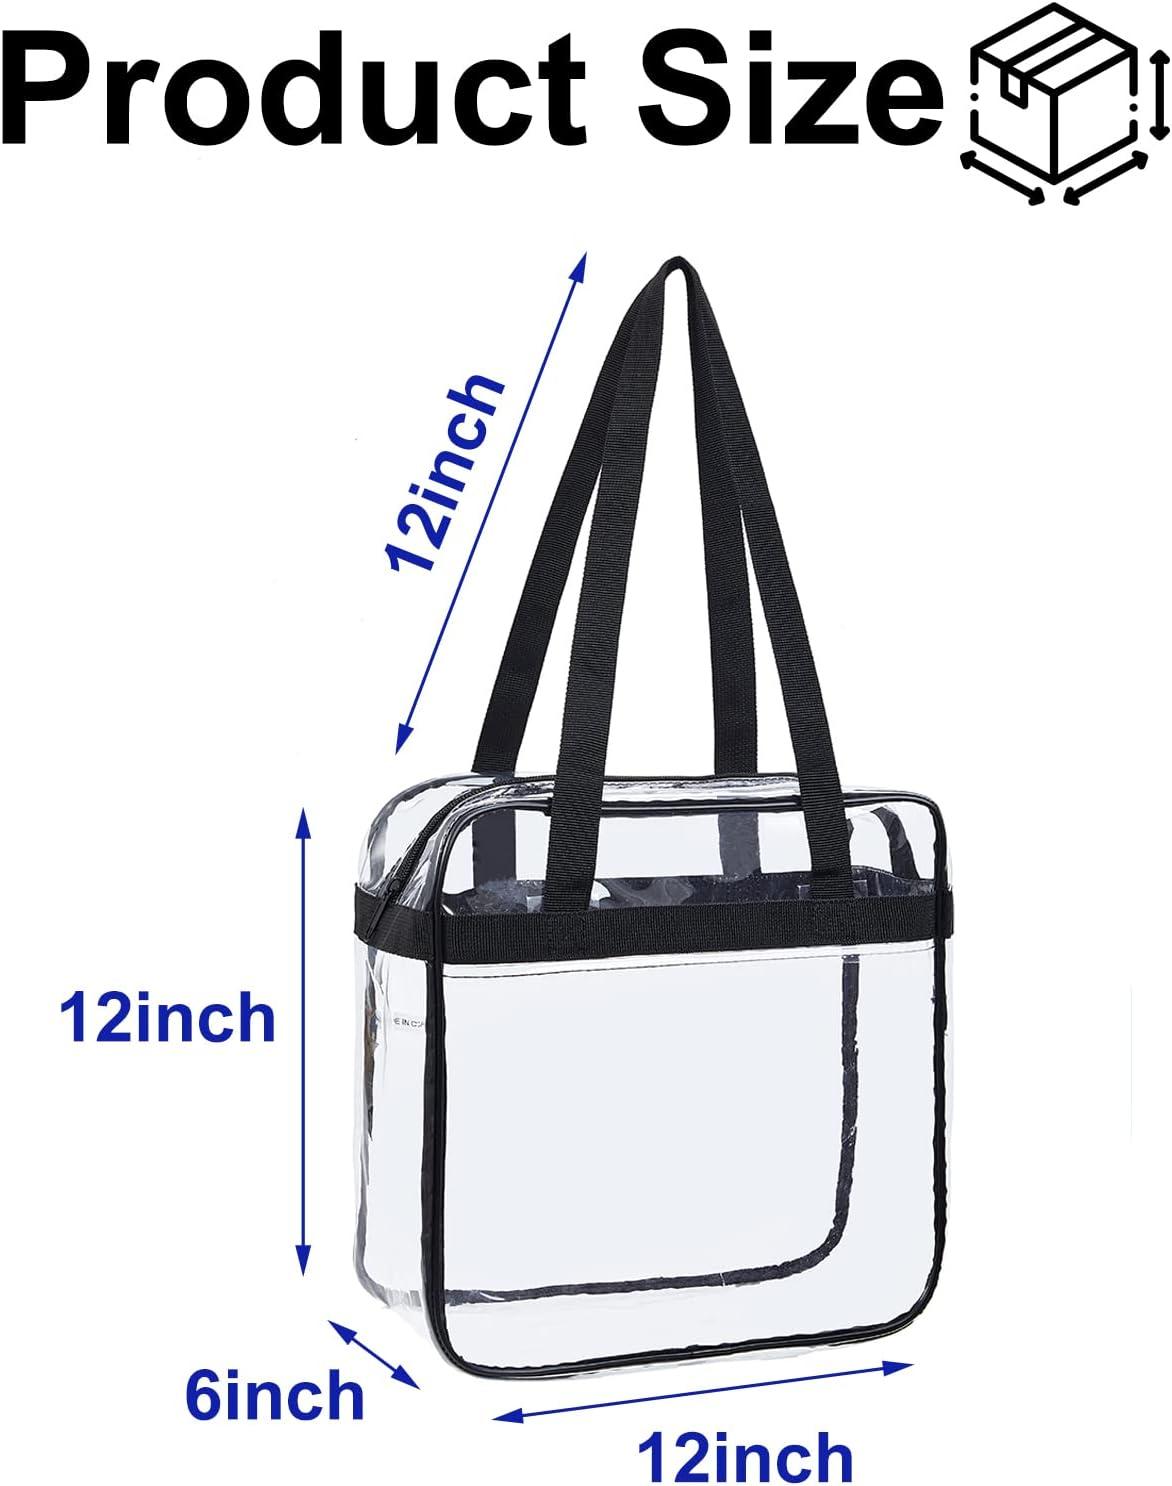 Clear Stadium Approved Tote Bag, 11x4x7-Inch Transparent Plastic Bag with  Zippers, Handles for Concerts, Sporting Events, Music Festivals, Work,  School, and Gym - Walmart.com